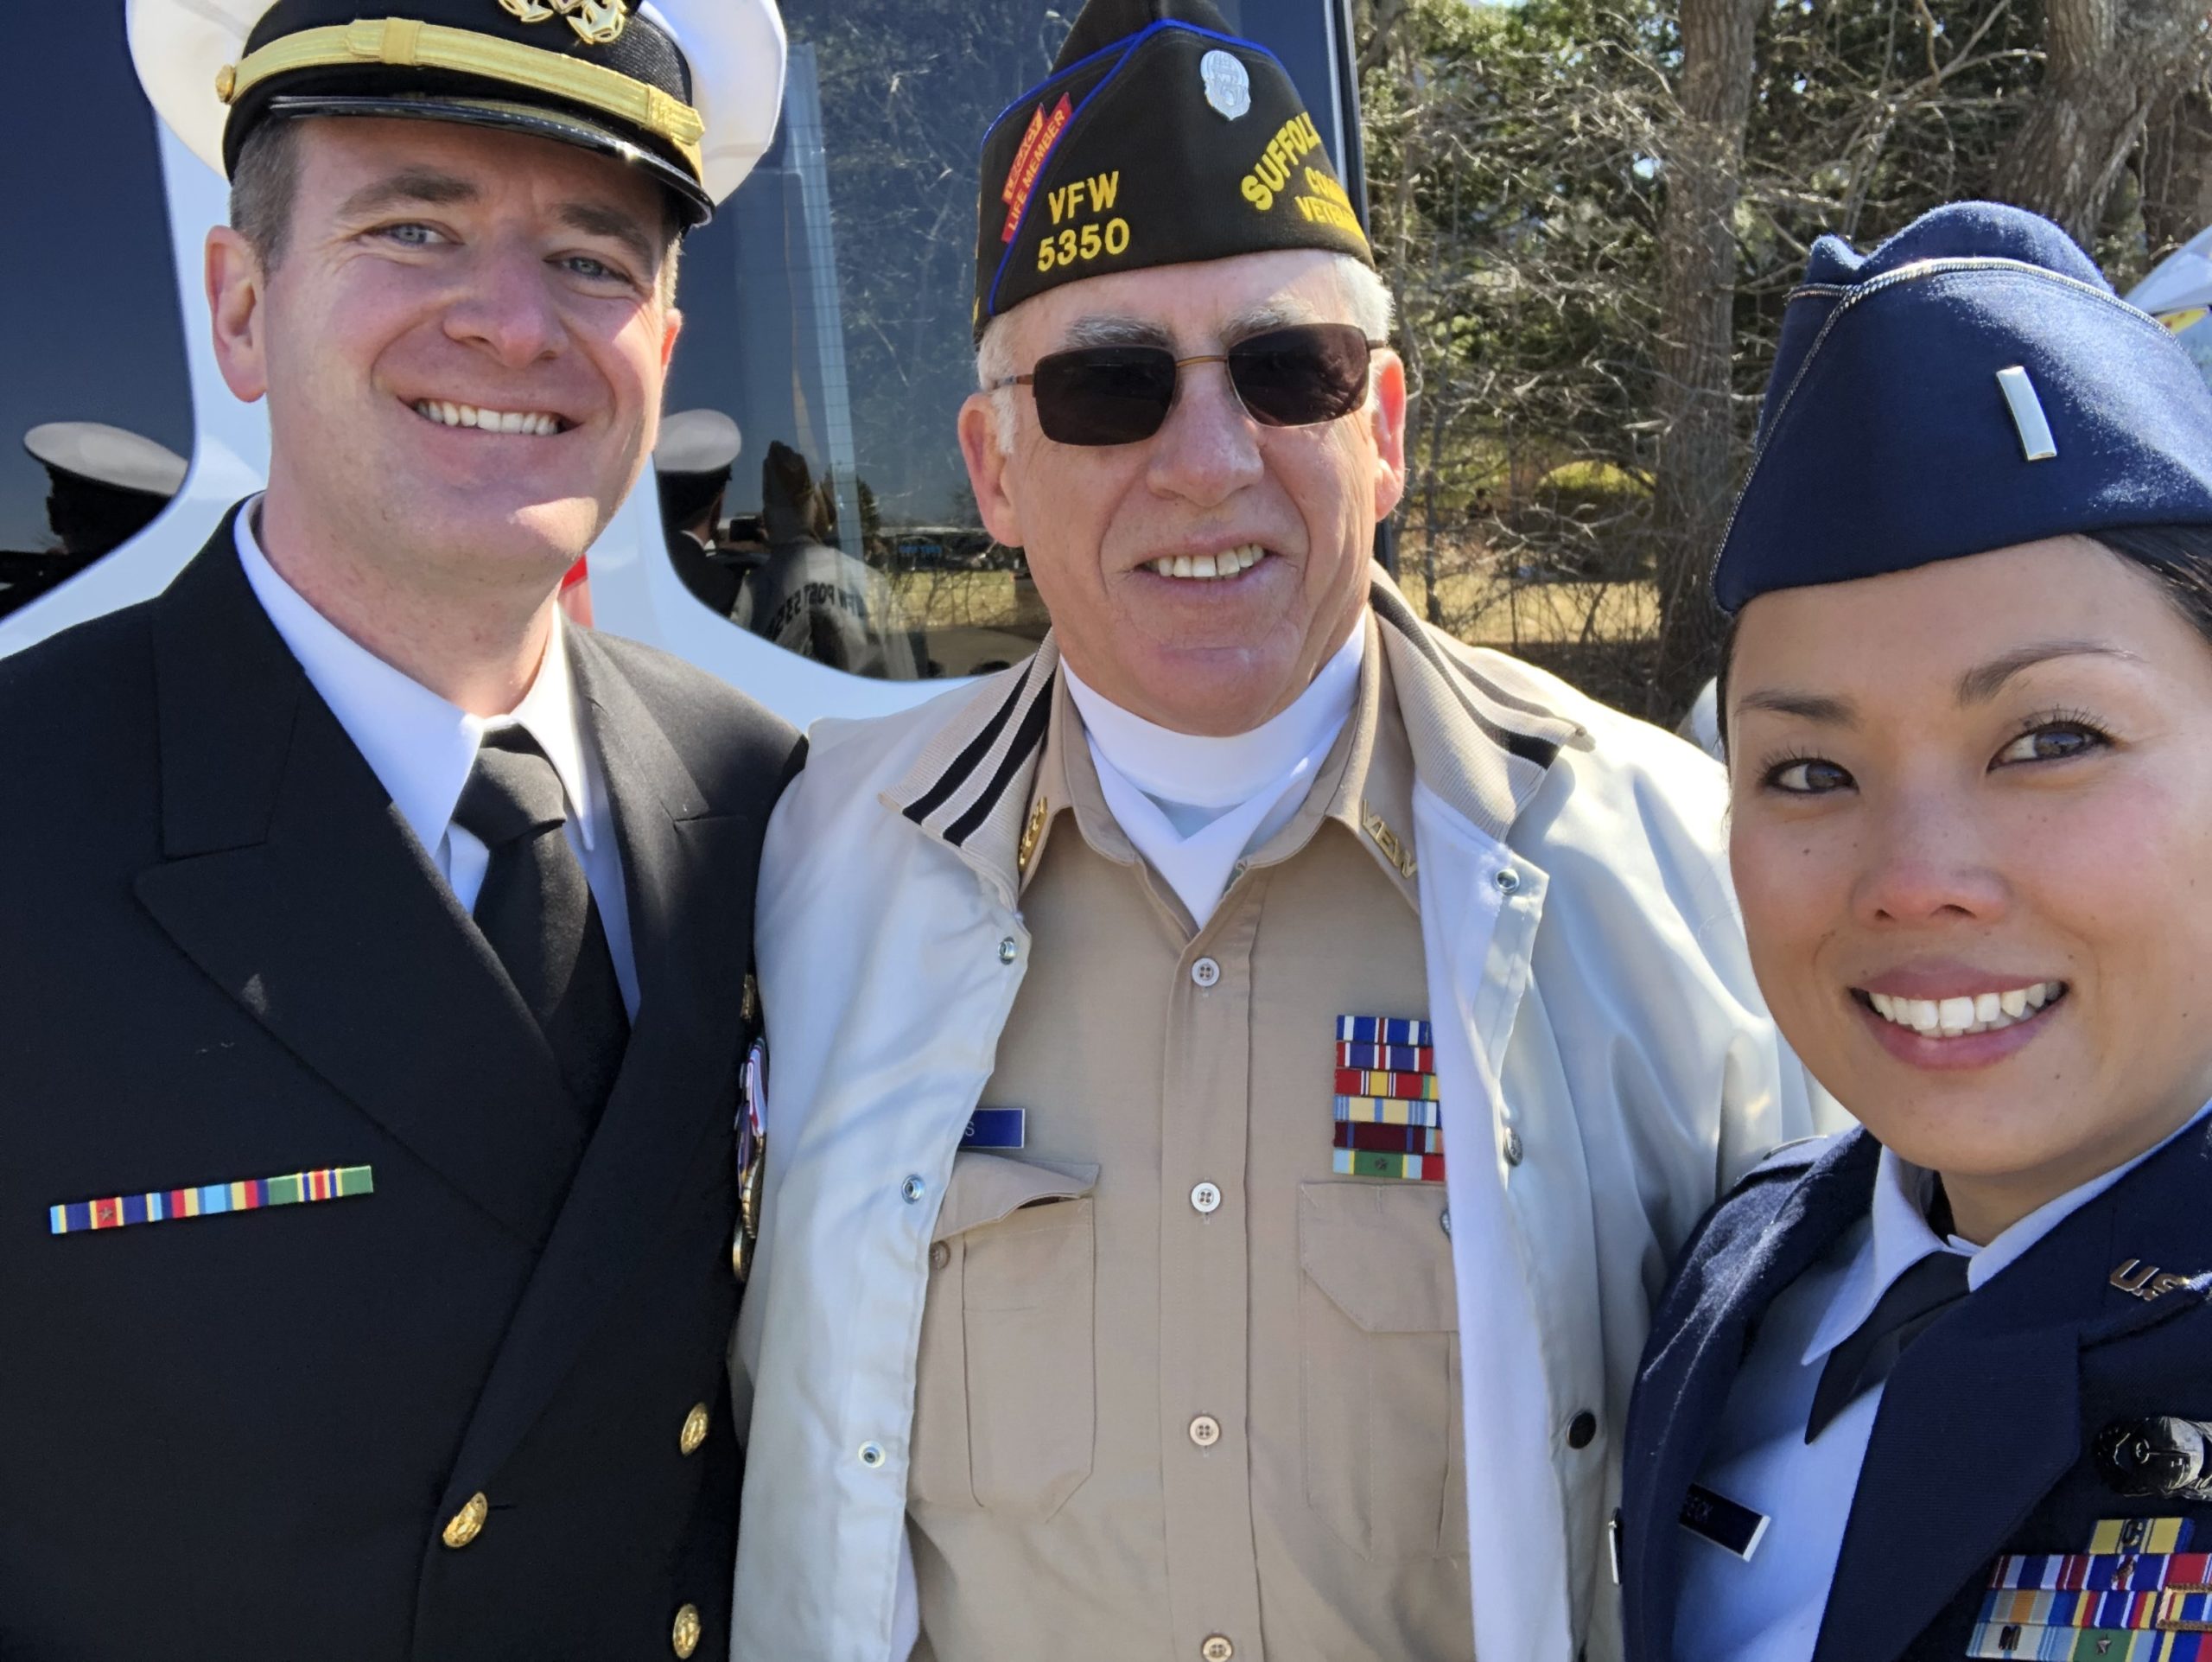 Scribner with VFW Post 5350 Commander Bill Hughes and Air Force officer Tia Beck of the 106th Rescue Wing at the Westhampton Beach St Patrick's Day Parade in 2019.